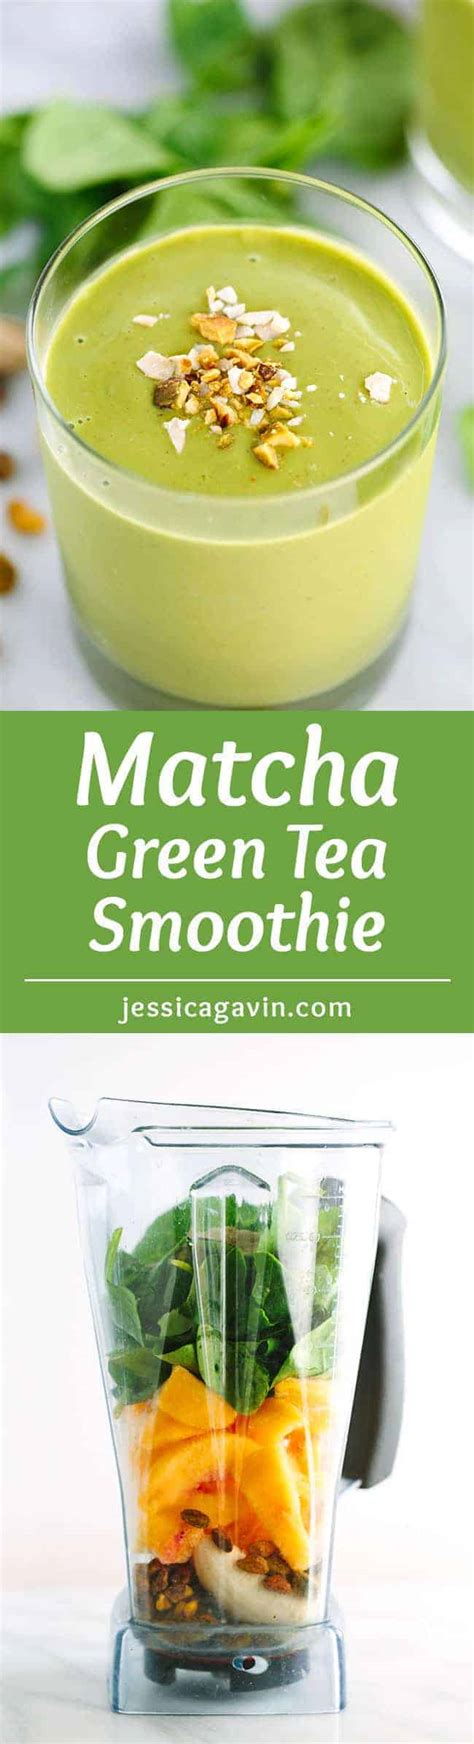 Energizing Matcha Green Tea Smoothie With Peaches Jessica Gavin